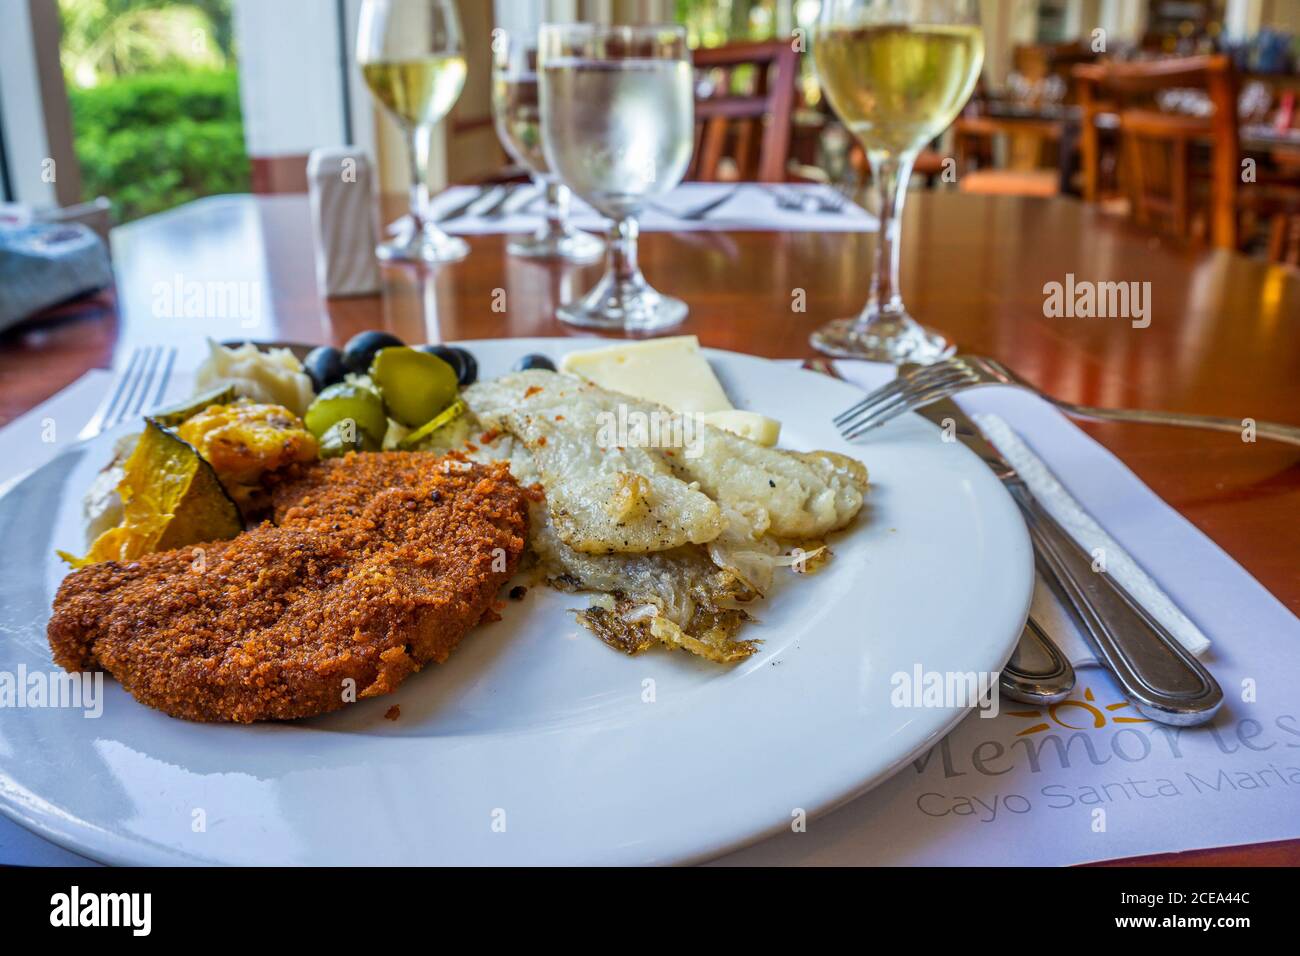 Cayo Santa Maria hotel resort, Cuba, February 2016 - Tasty food on a plate and glass of wine in restaurant. Stock Photo